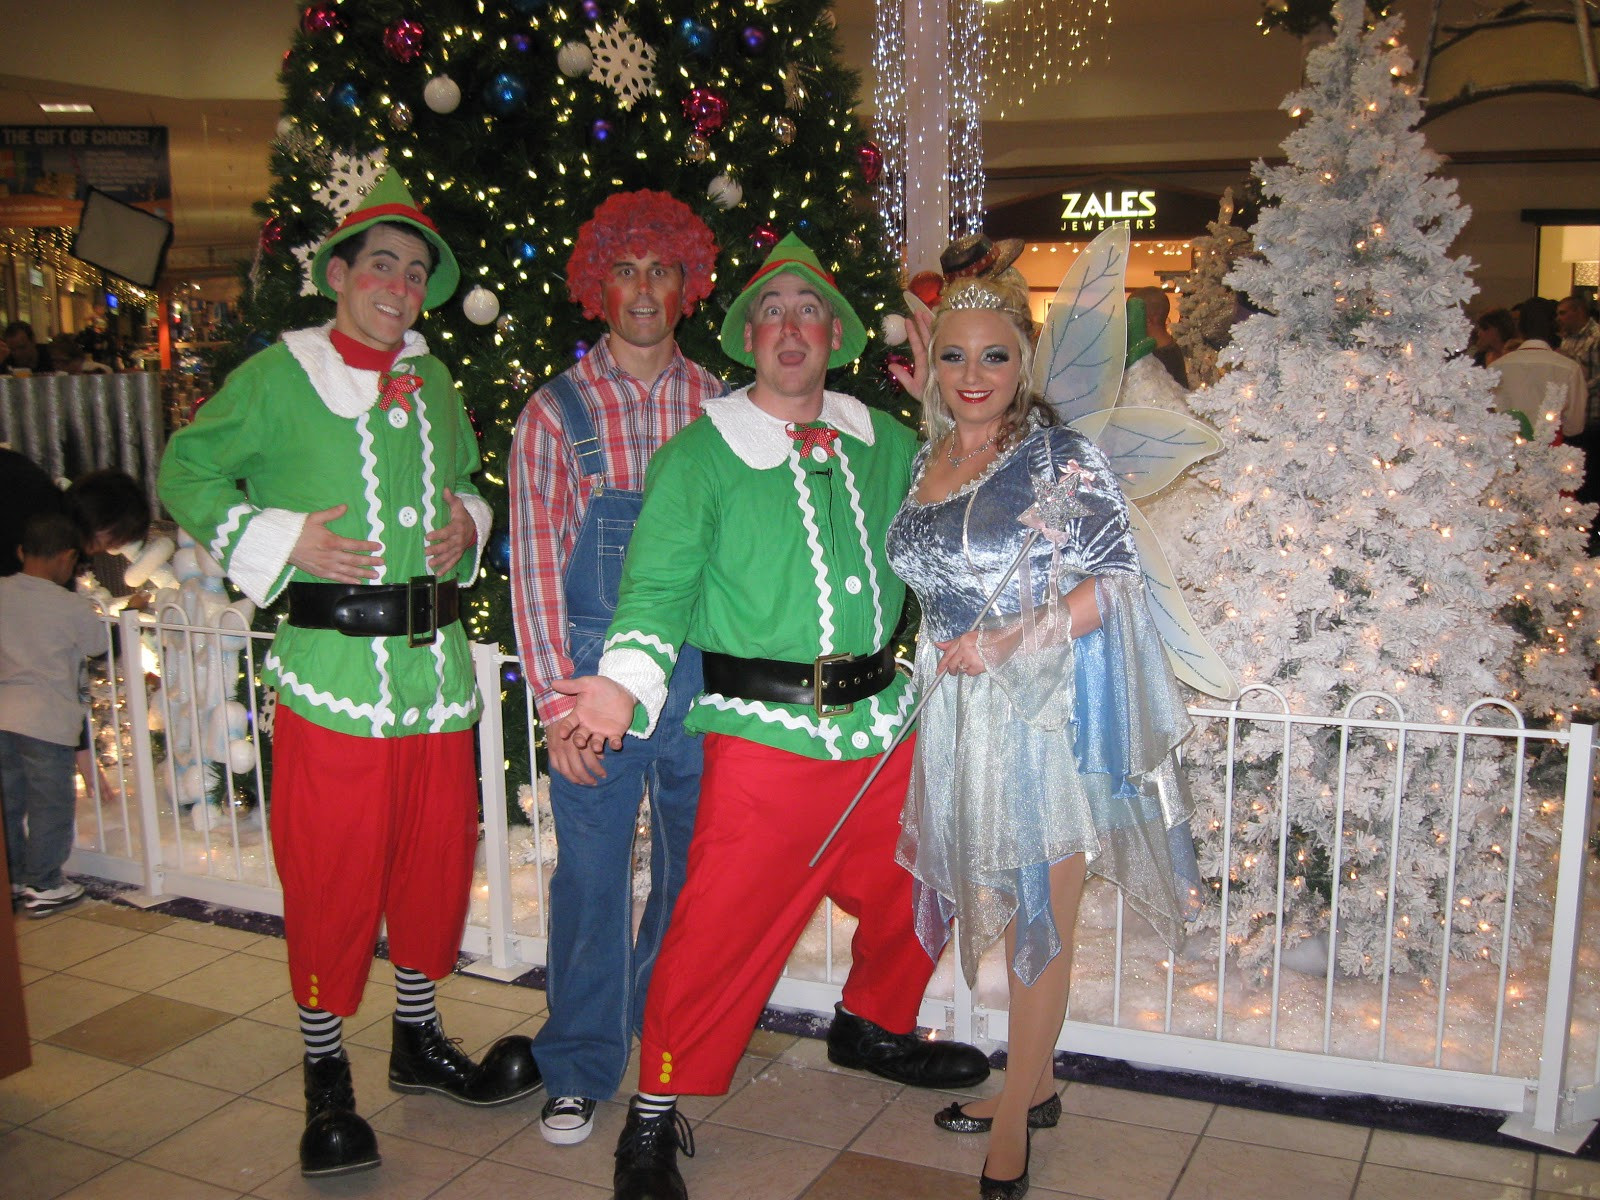 Corporate Holiday Party Entertainment Ideas
 ASTinc